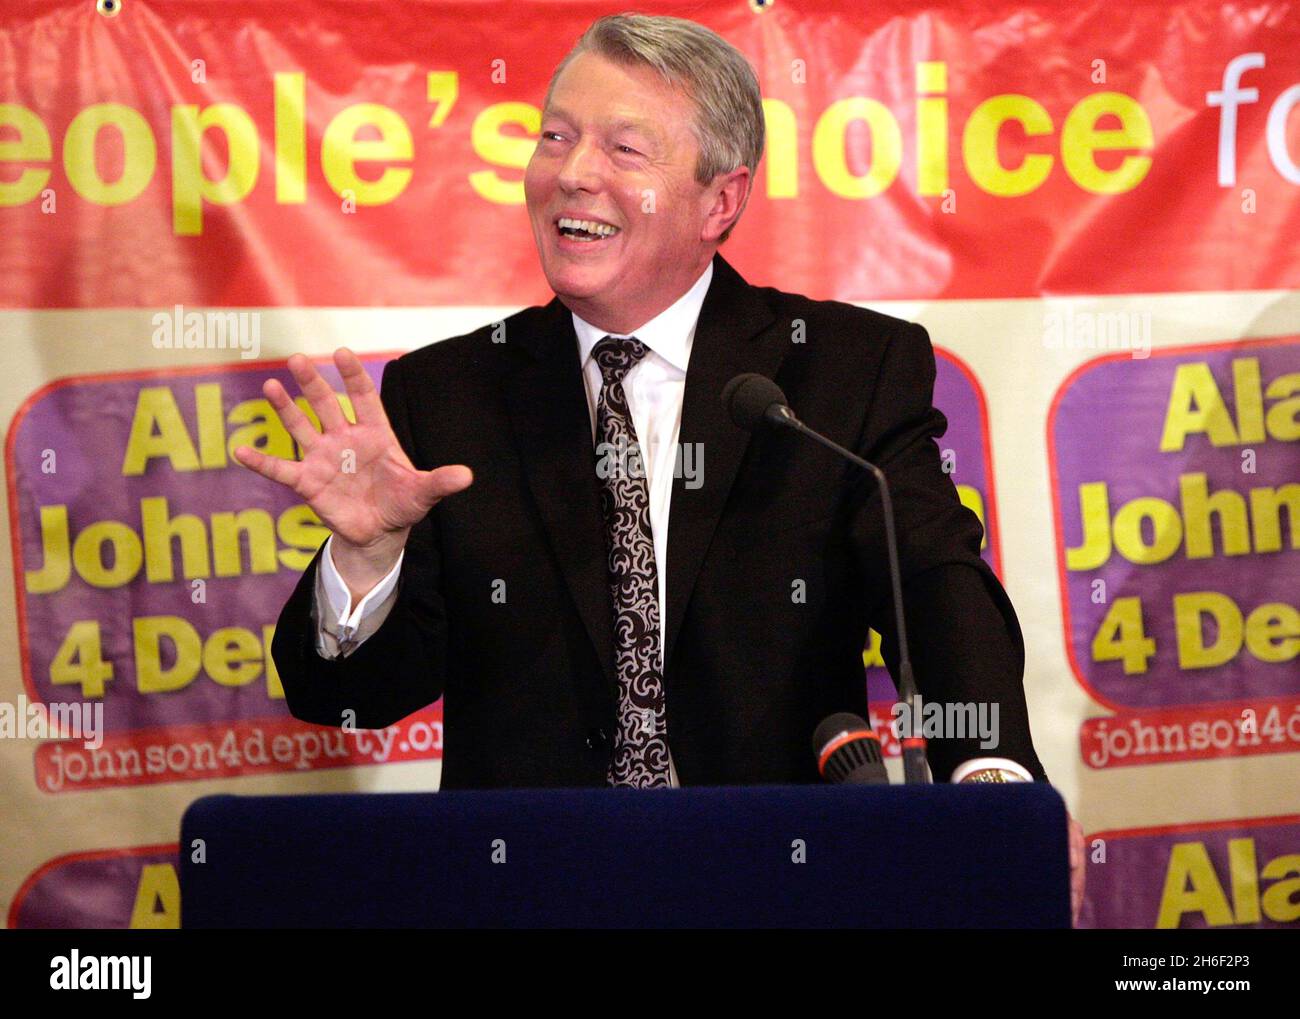 Education Secretary Alan Johnson launches his bid to become the next deputy leader of the Labour Party in Westminster, London today, May 15, 2007. He has obtained the backing of more than 60 fellow Labour MPs, which puts him well above the 44 nominations needed to secure a place on the ballot paper, with nominations due to close on Thursday. Stock Photo